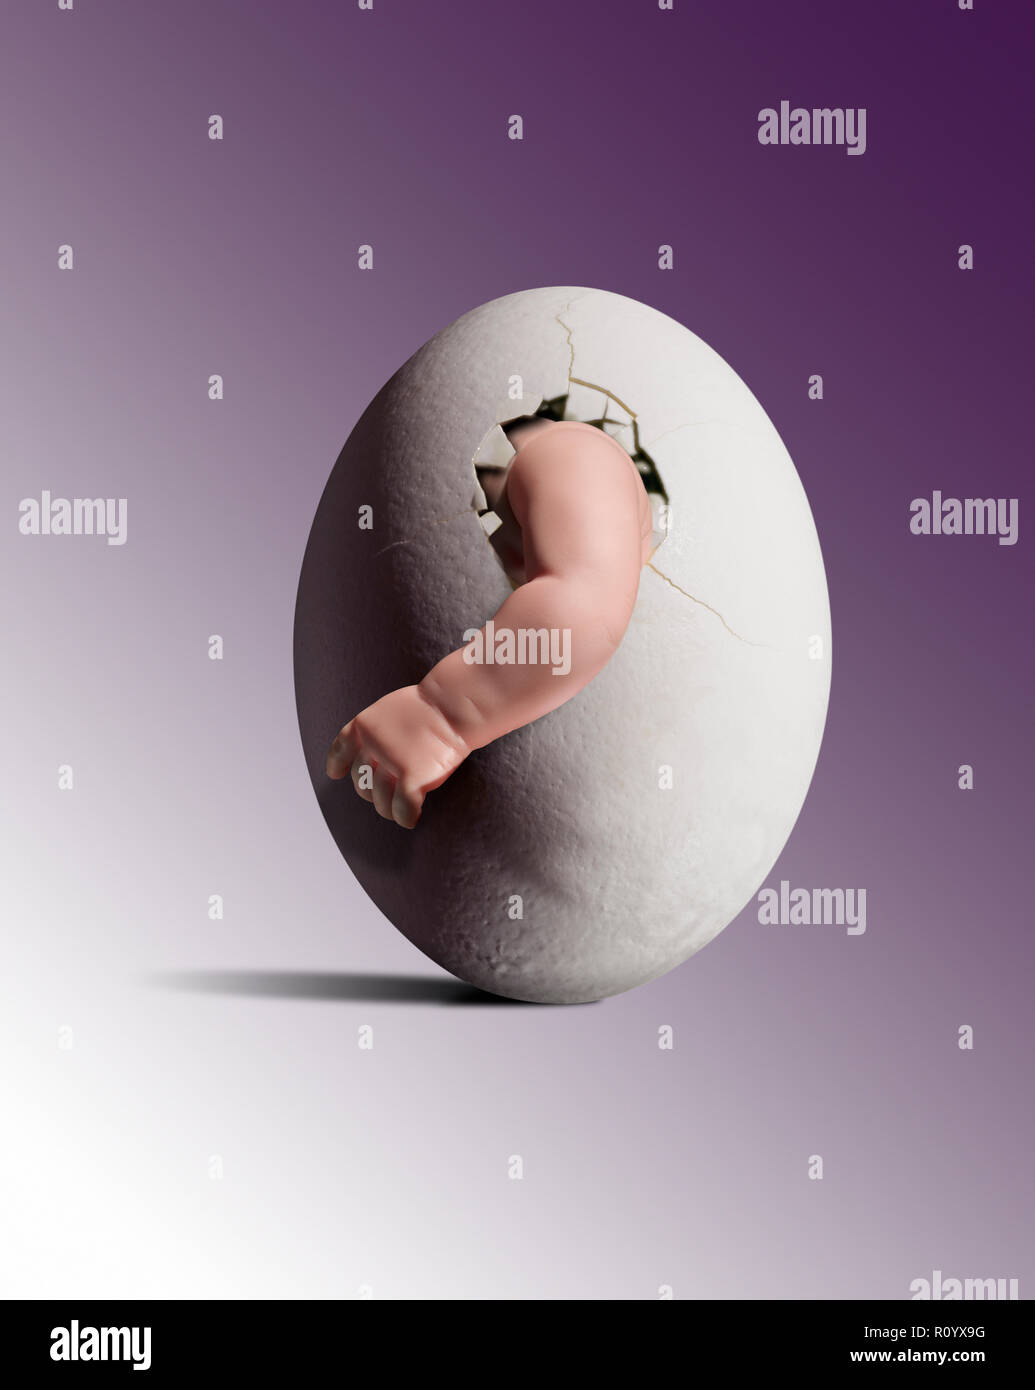 Human baby arm emerging from cracked surrogate egg against graduated background Stock Photo